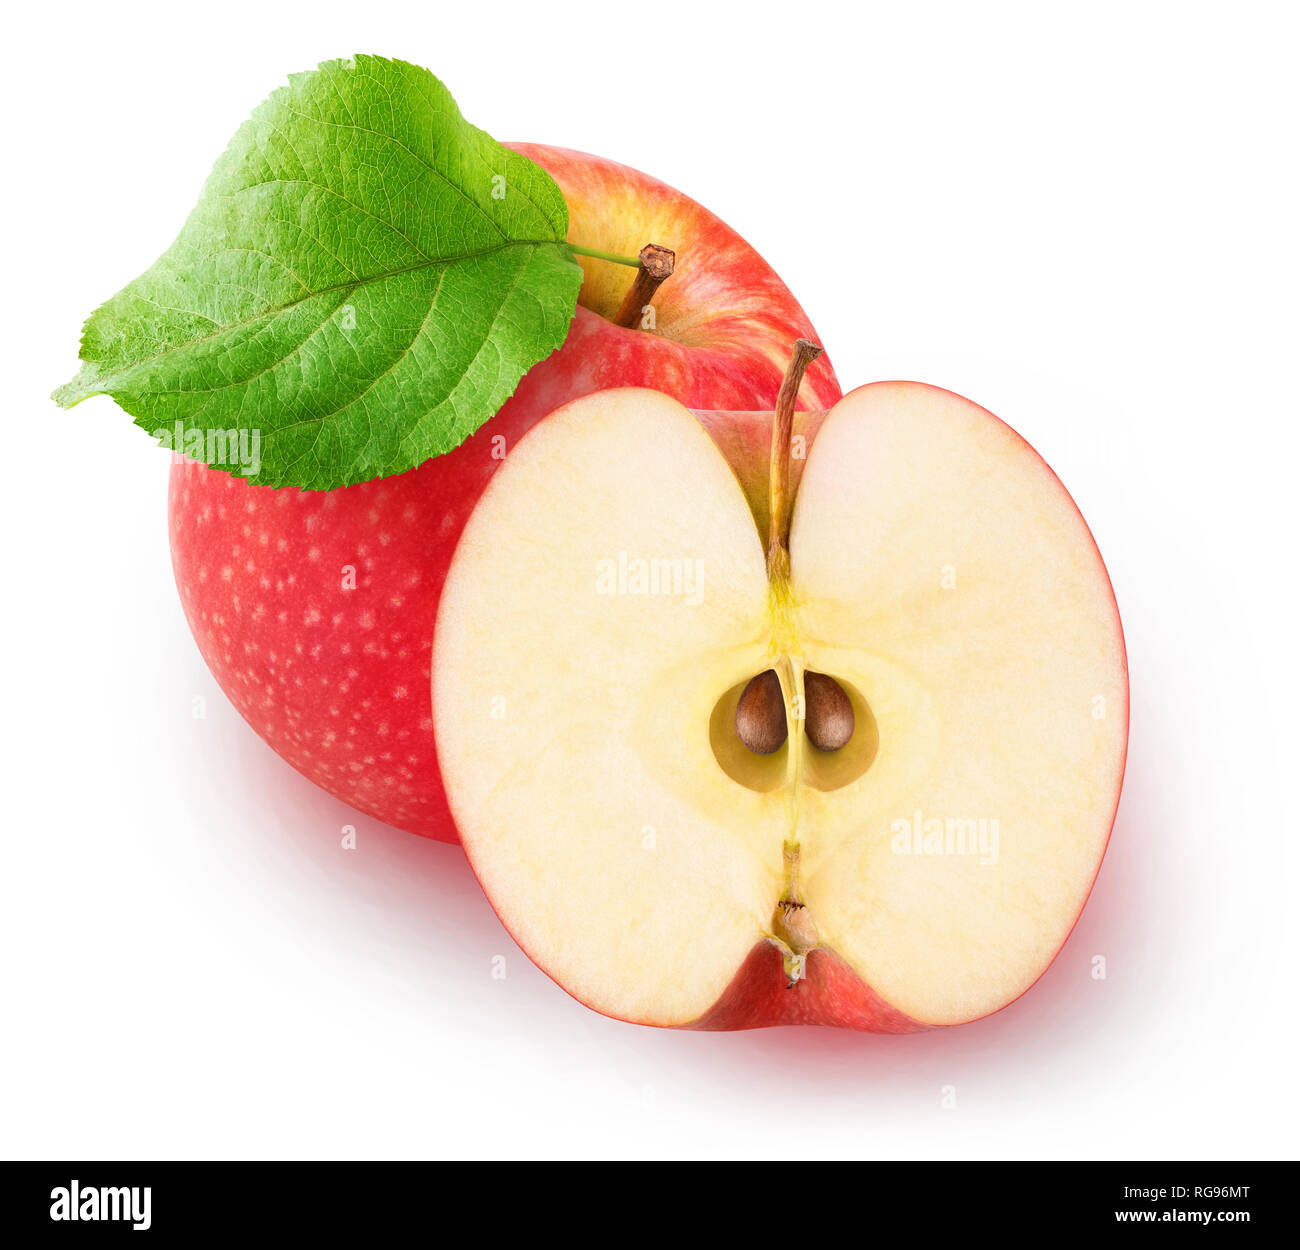 https://c8.alamy.com/comp/RG96MT/isolated-apples-one-red-apple-and-a-half-isolated-on-white-background-with-clipping-path-RG96MT.jpg